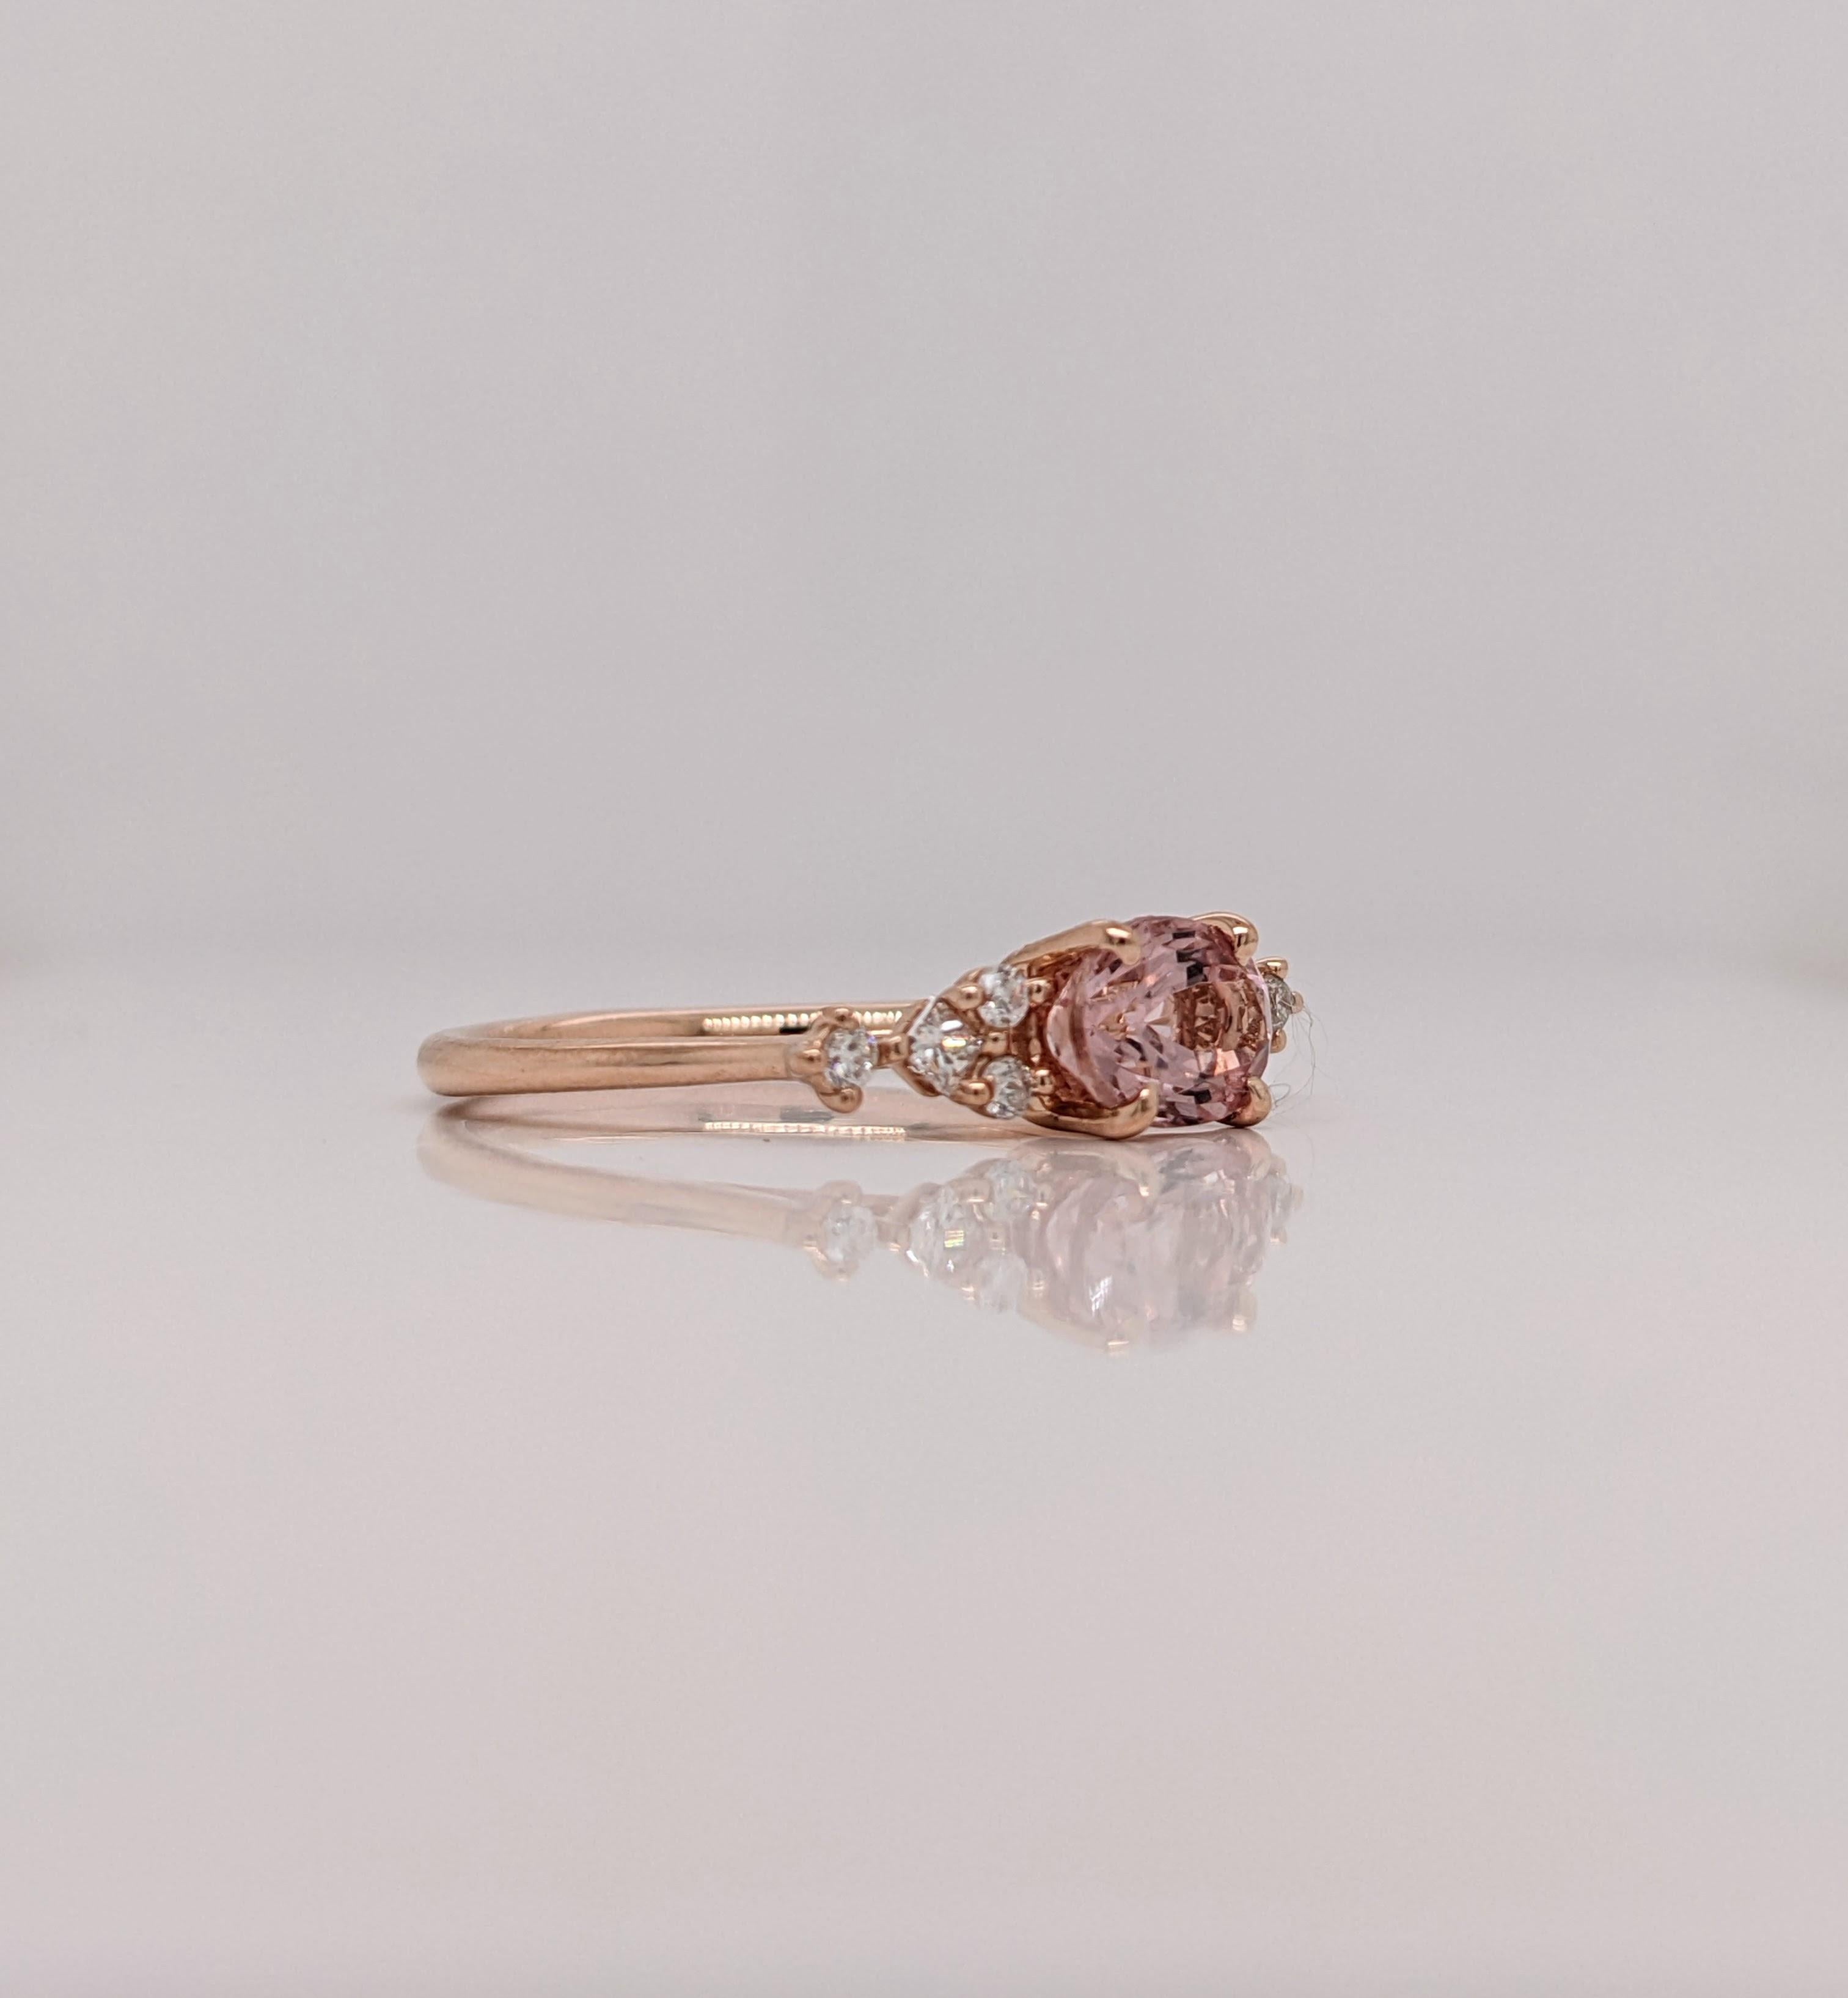 This dainty ring features a Cor De Rosa pink Morganite in 14k rose Gold with natural diamond accents. A timeless ring design perfect for an eye catching engagement or anniversary. This ring also makes a beautiful birthstone ring for your loved